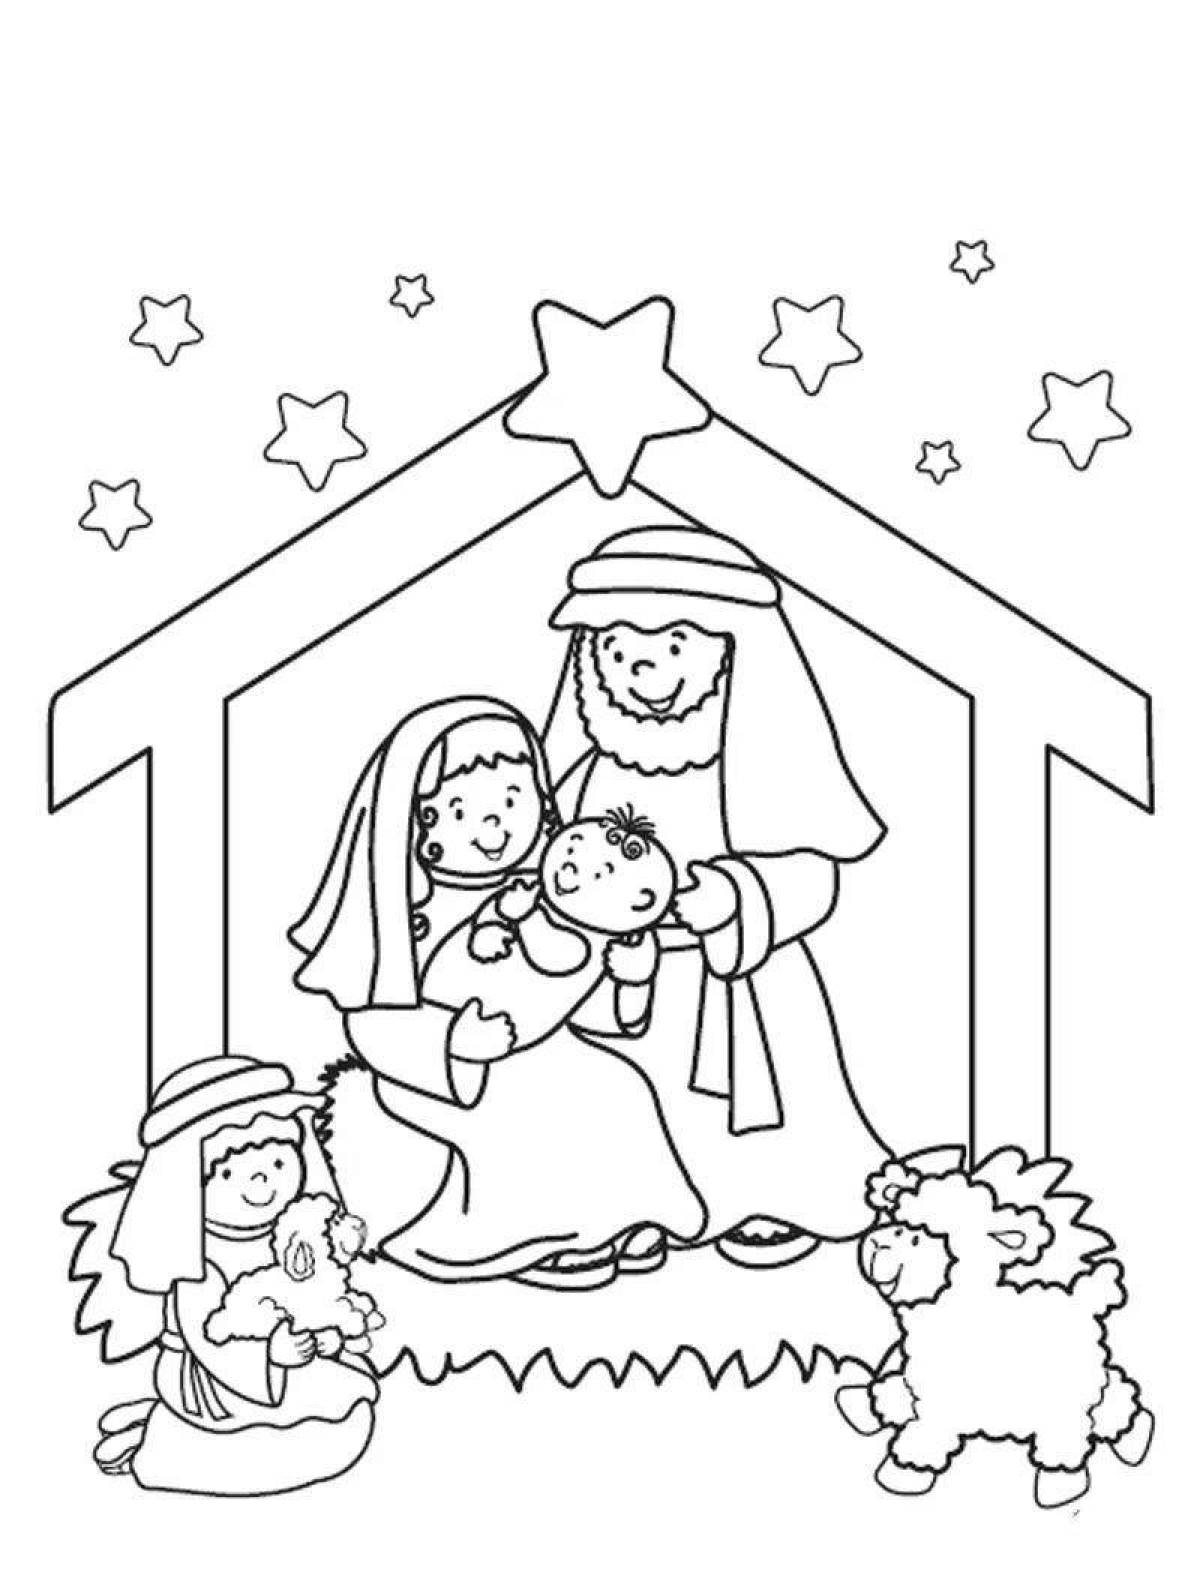 Tasty merry christmas coloring book